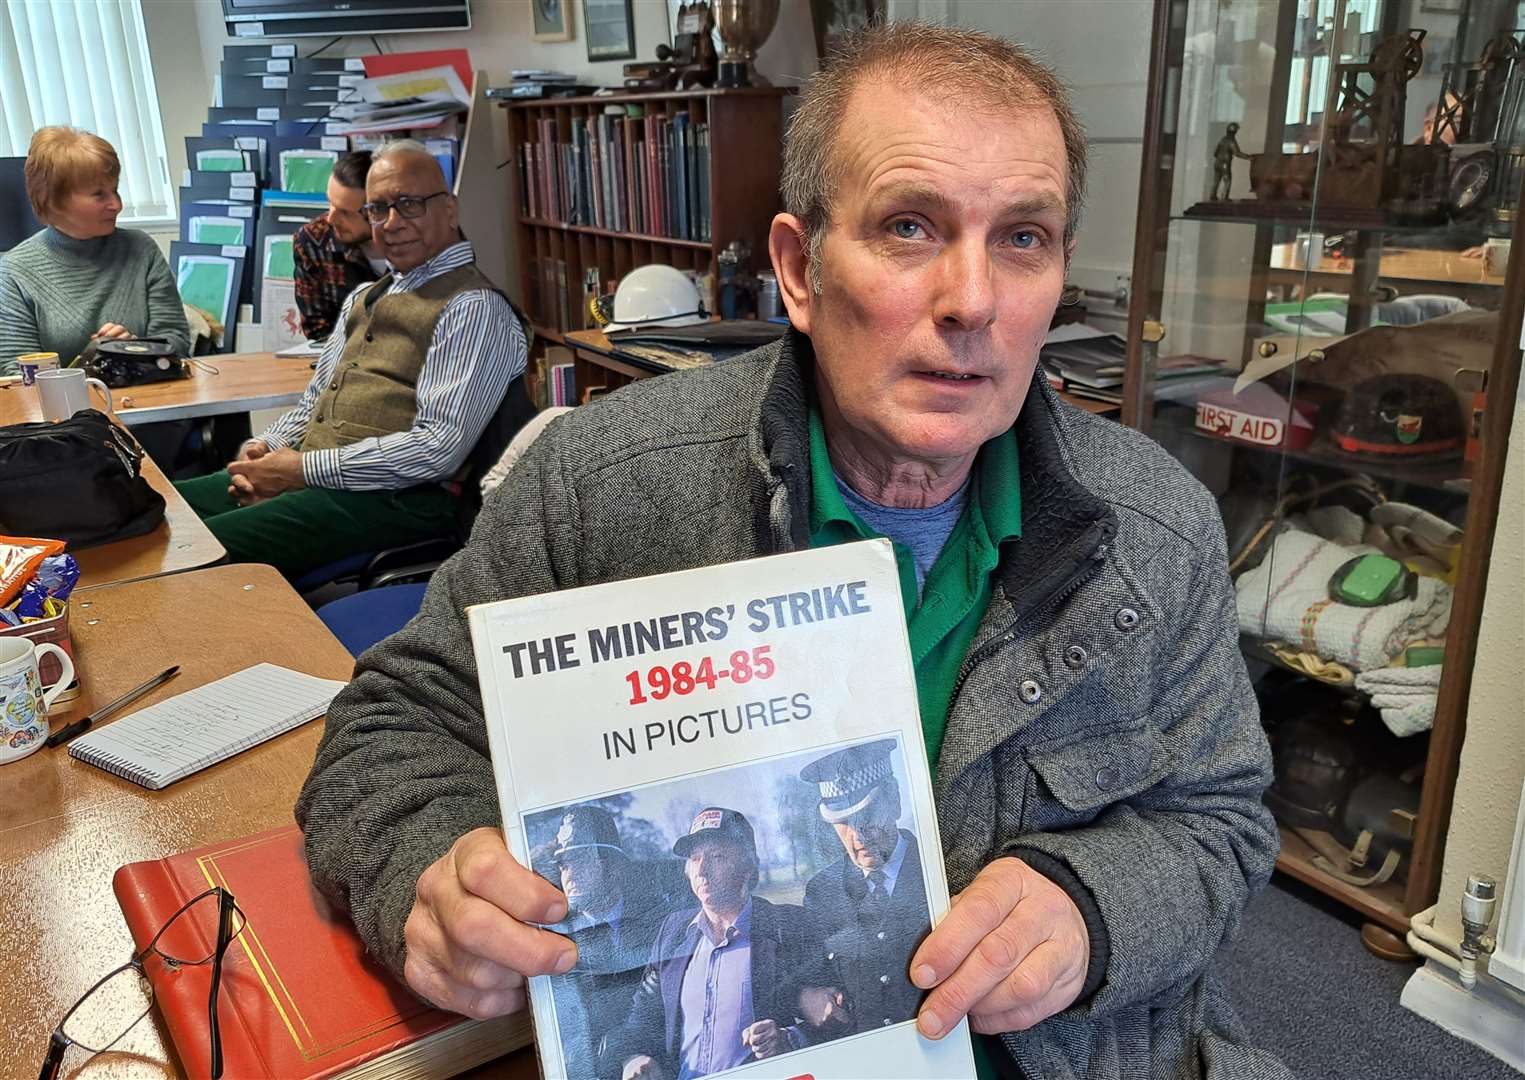 Ex-miner Shaun Parry with a book on the strike